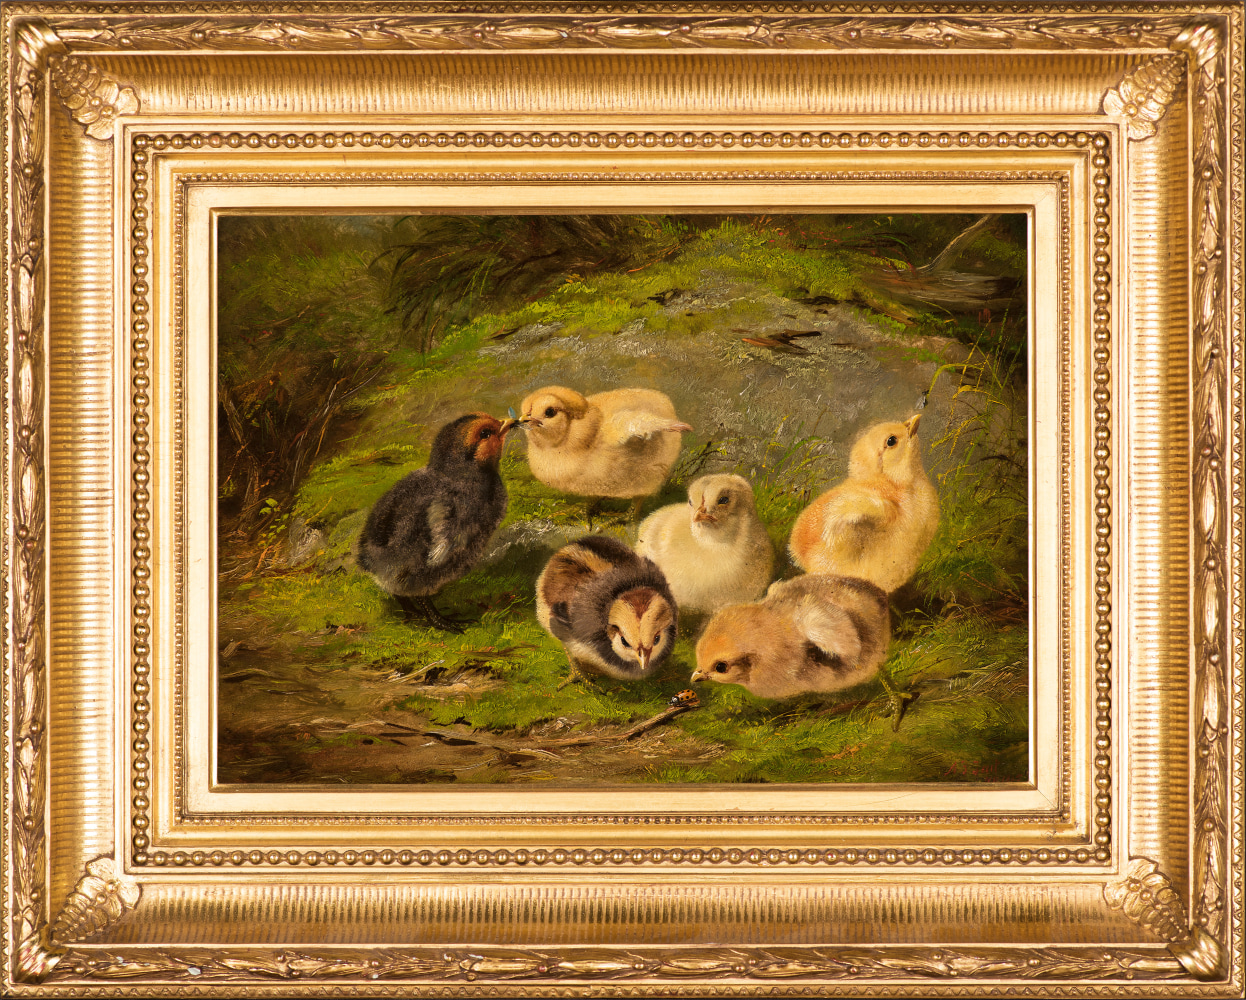 Arthur Fitzwilliam Tait (1819–1905), Chickens, 1865, oil on artist board, 10 x 14 in., signed and dated lower right: A. F. Tait / 1865 Inscribed on verso: 402 / AF Tait / 1865 (framed)